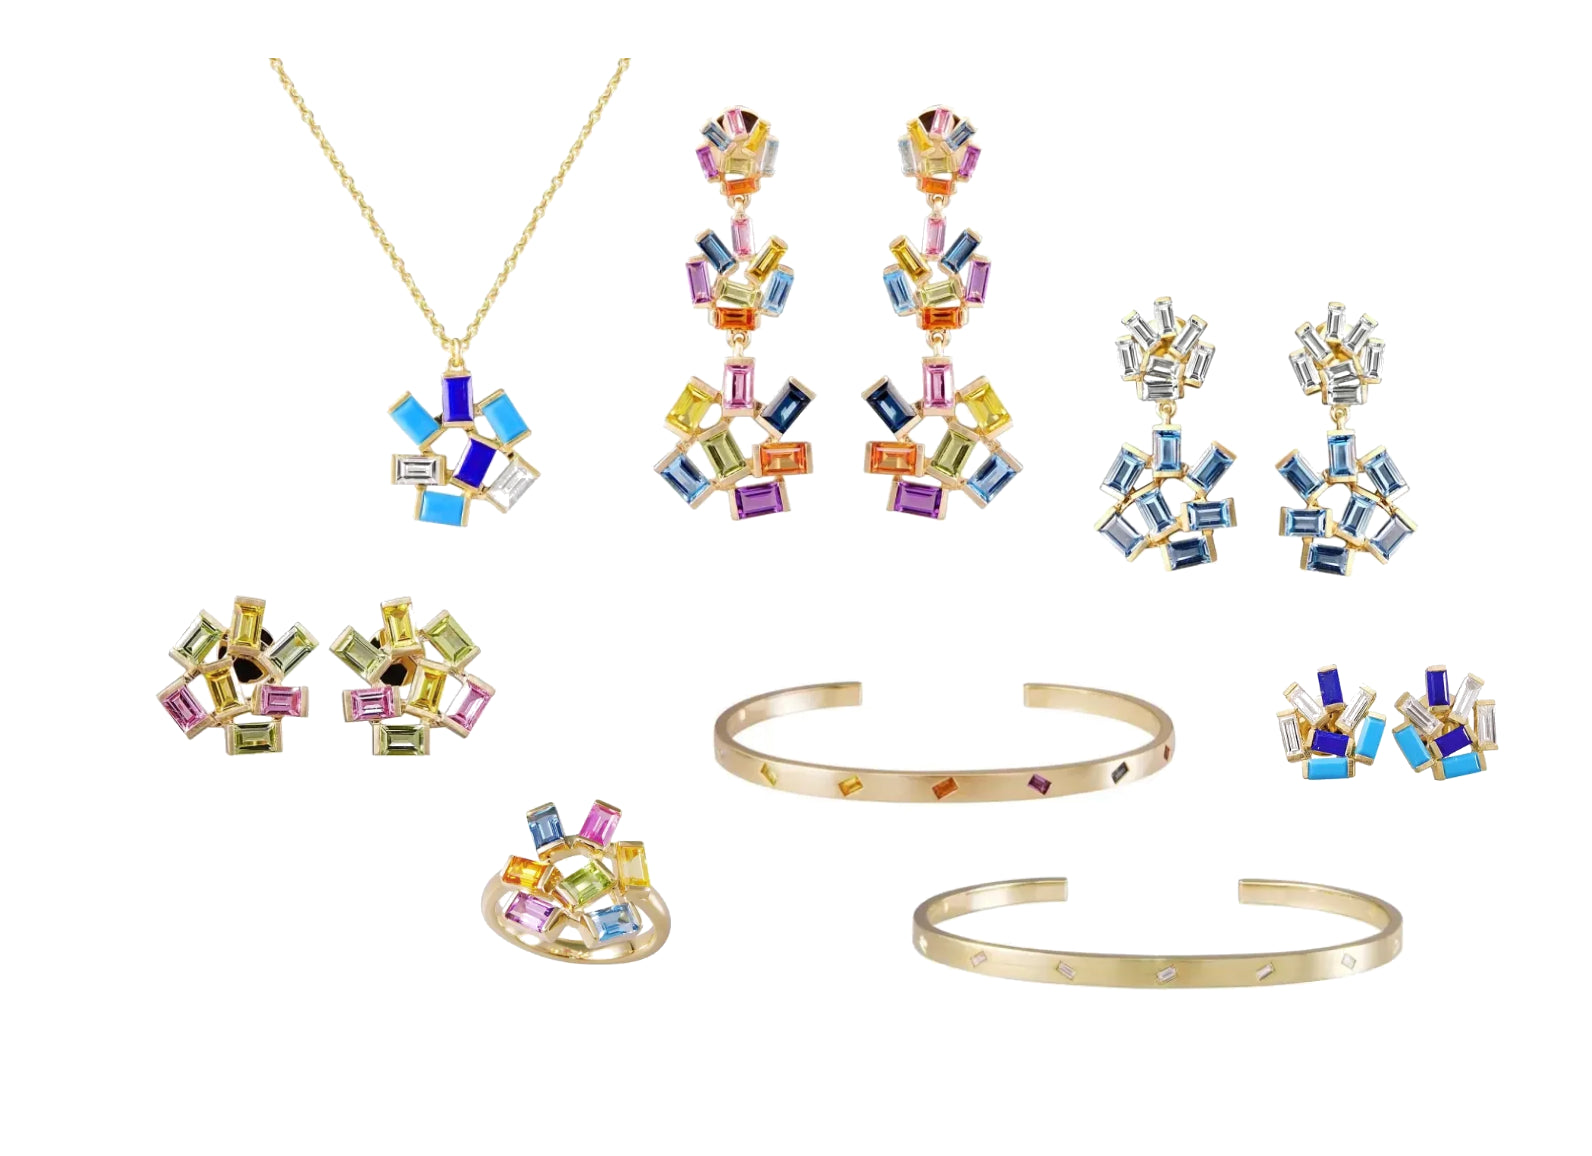 New Joyful Jewels Just in Time for the Holidays!